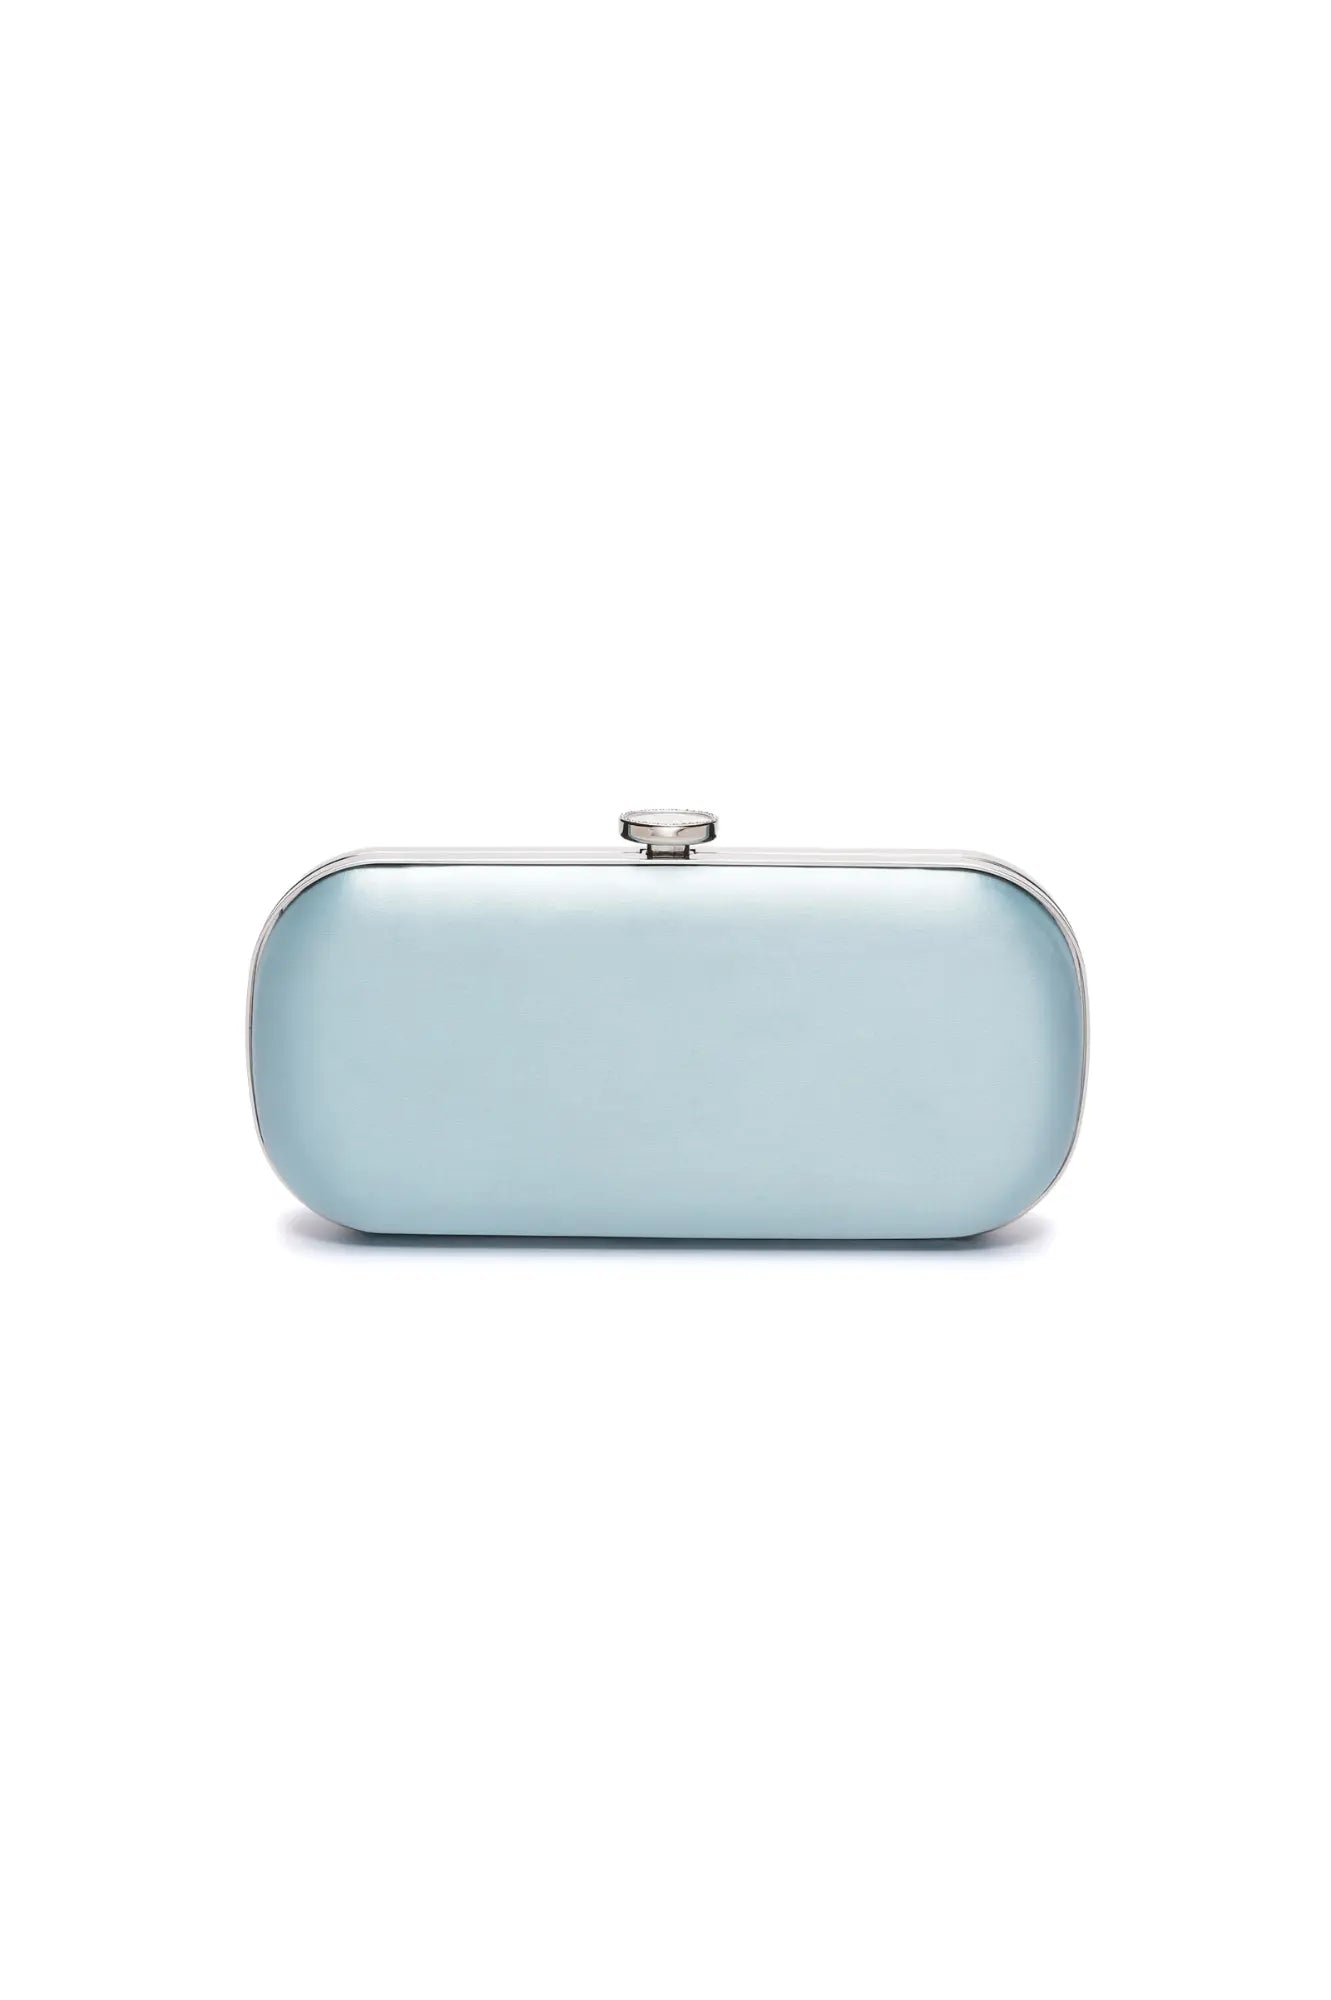 Mini Bella Clutch Cinderella Blue Petite on a white background from The Bella Rosa Collection.